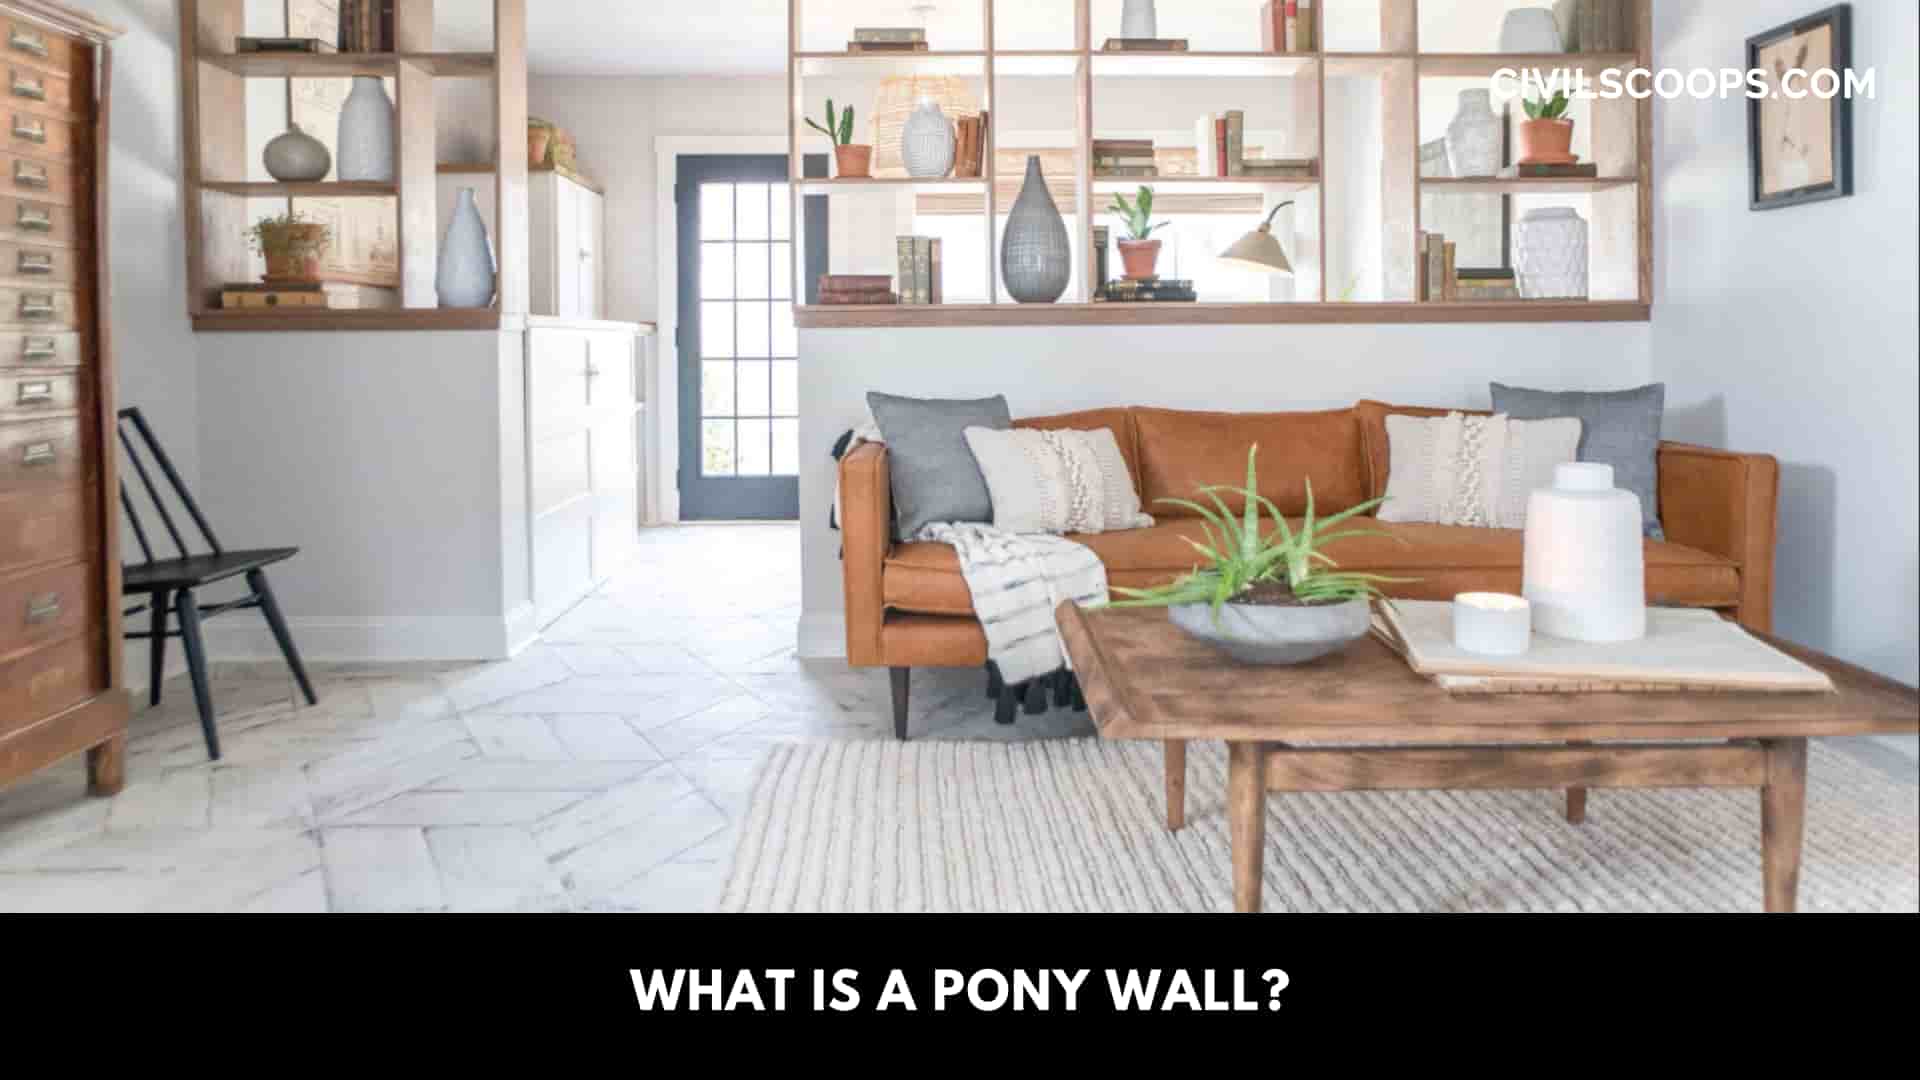 What Is a Pony Wall